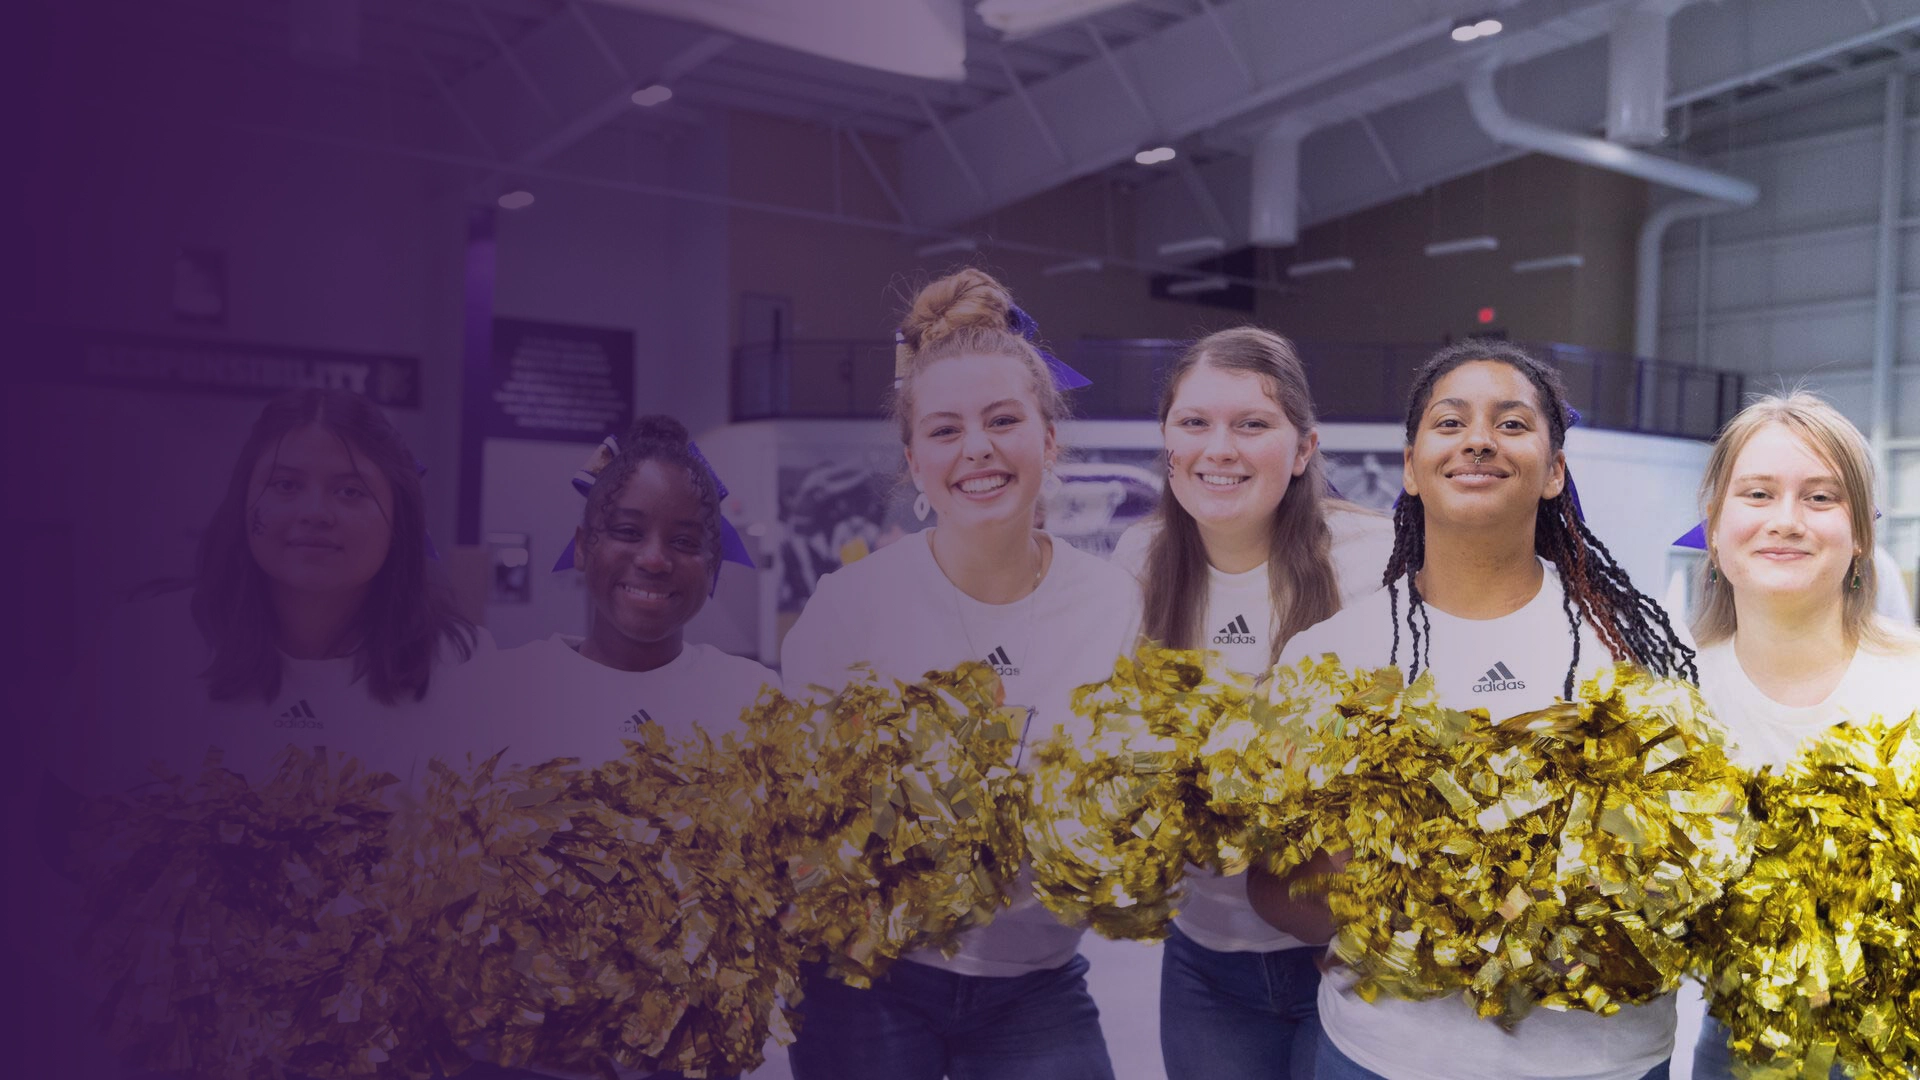 Six Houghton students standing with shimmery gold pom poms during Homecoming weekend.